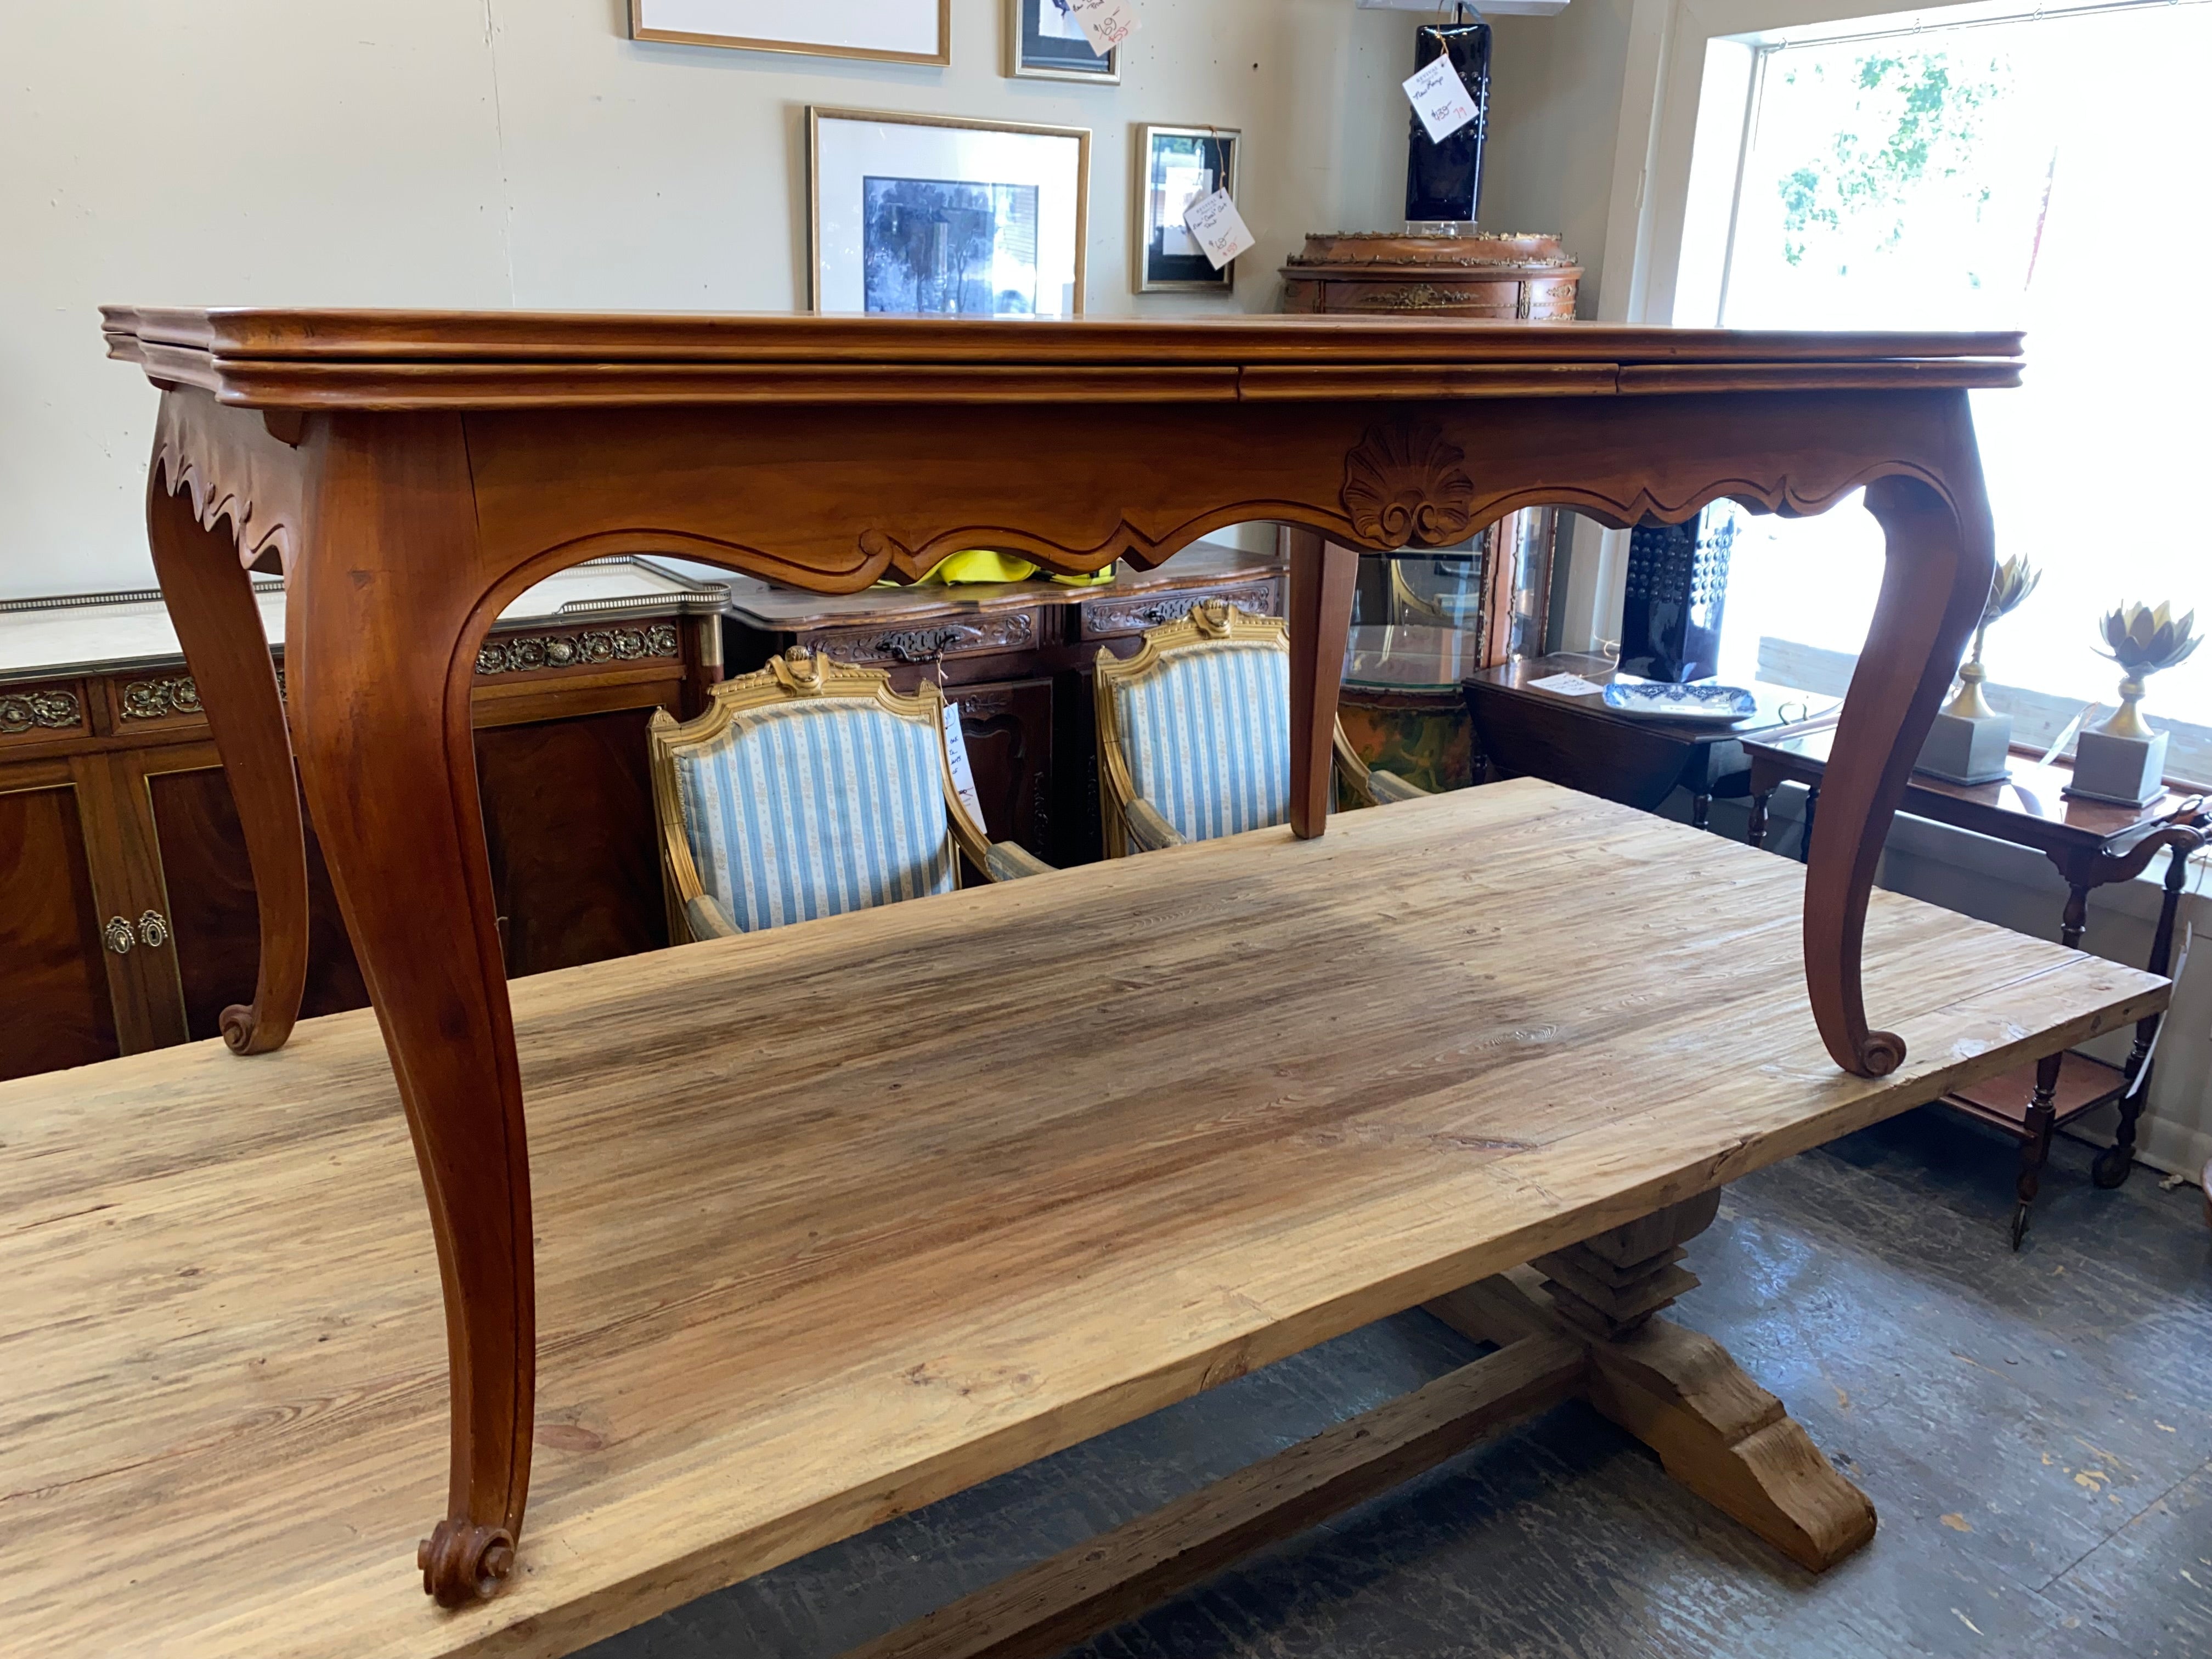 French Fruitwood Draw Leaf Dining Table C. 1930s